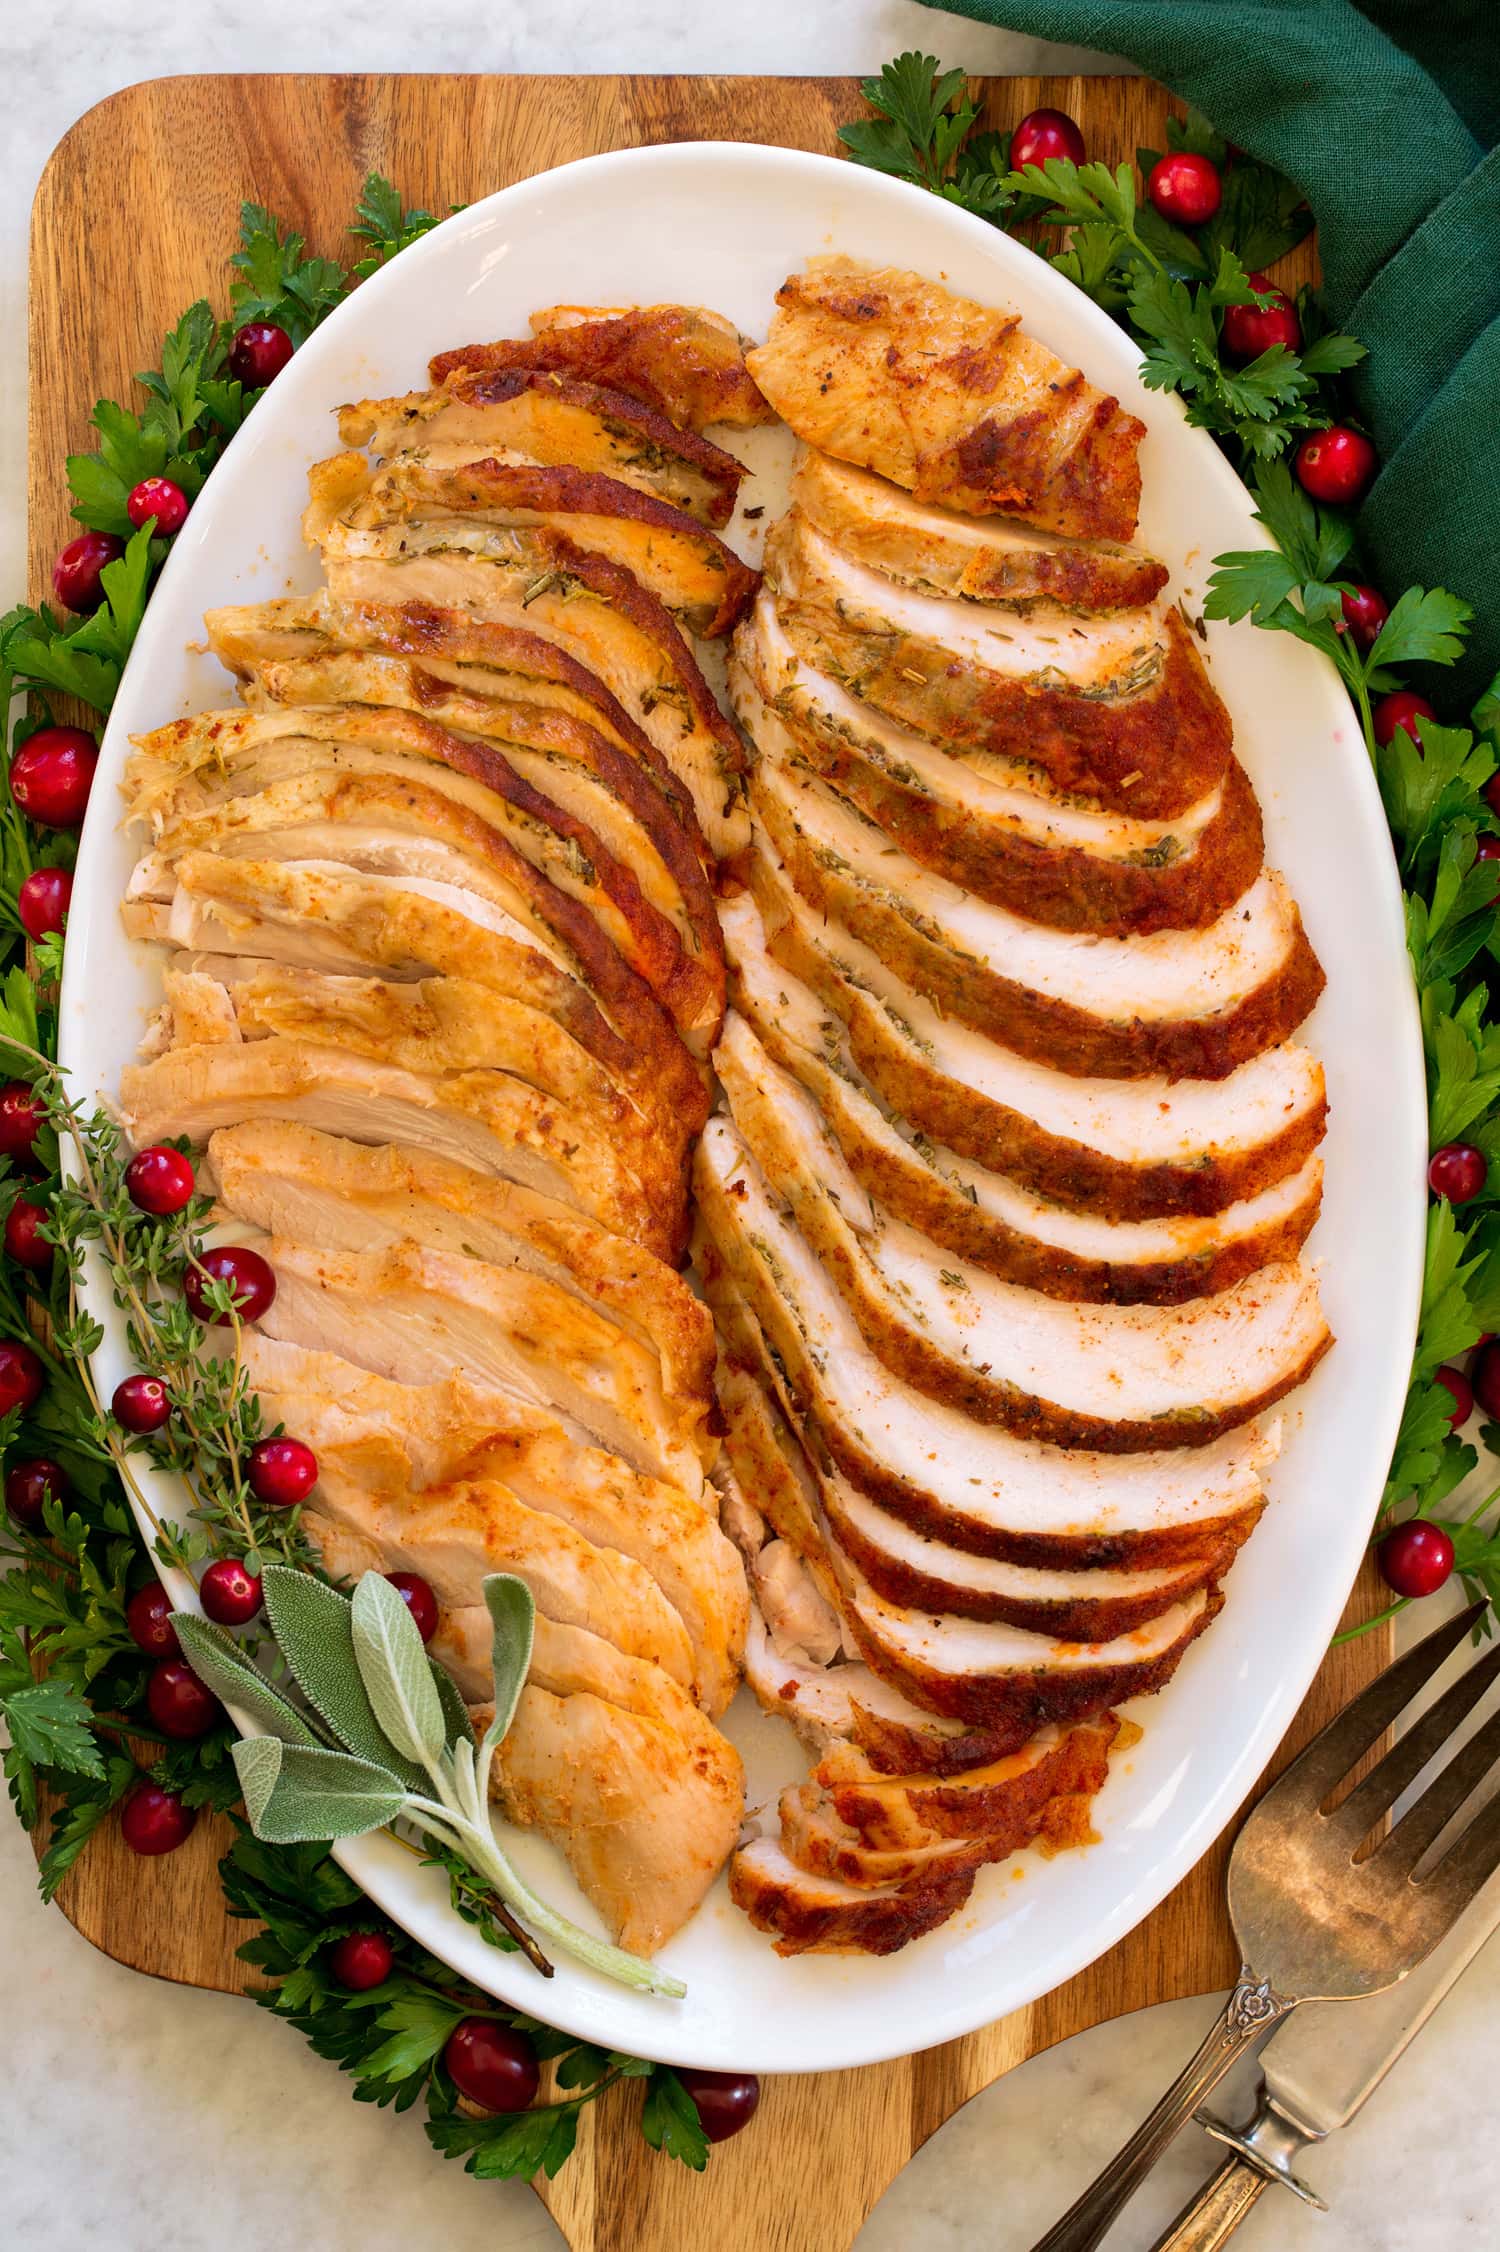 Crockpot Turkey Breast shown sliced on an oval platter with green herbs and fresh cranberries decorating sides.